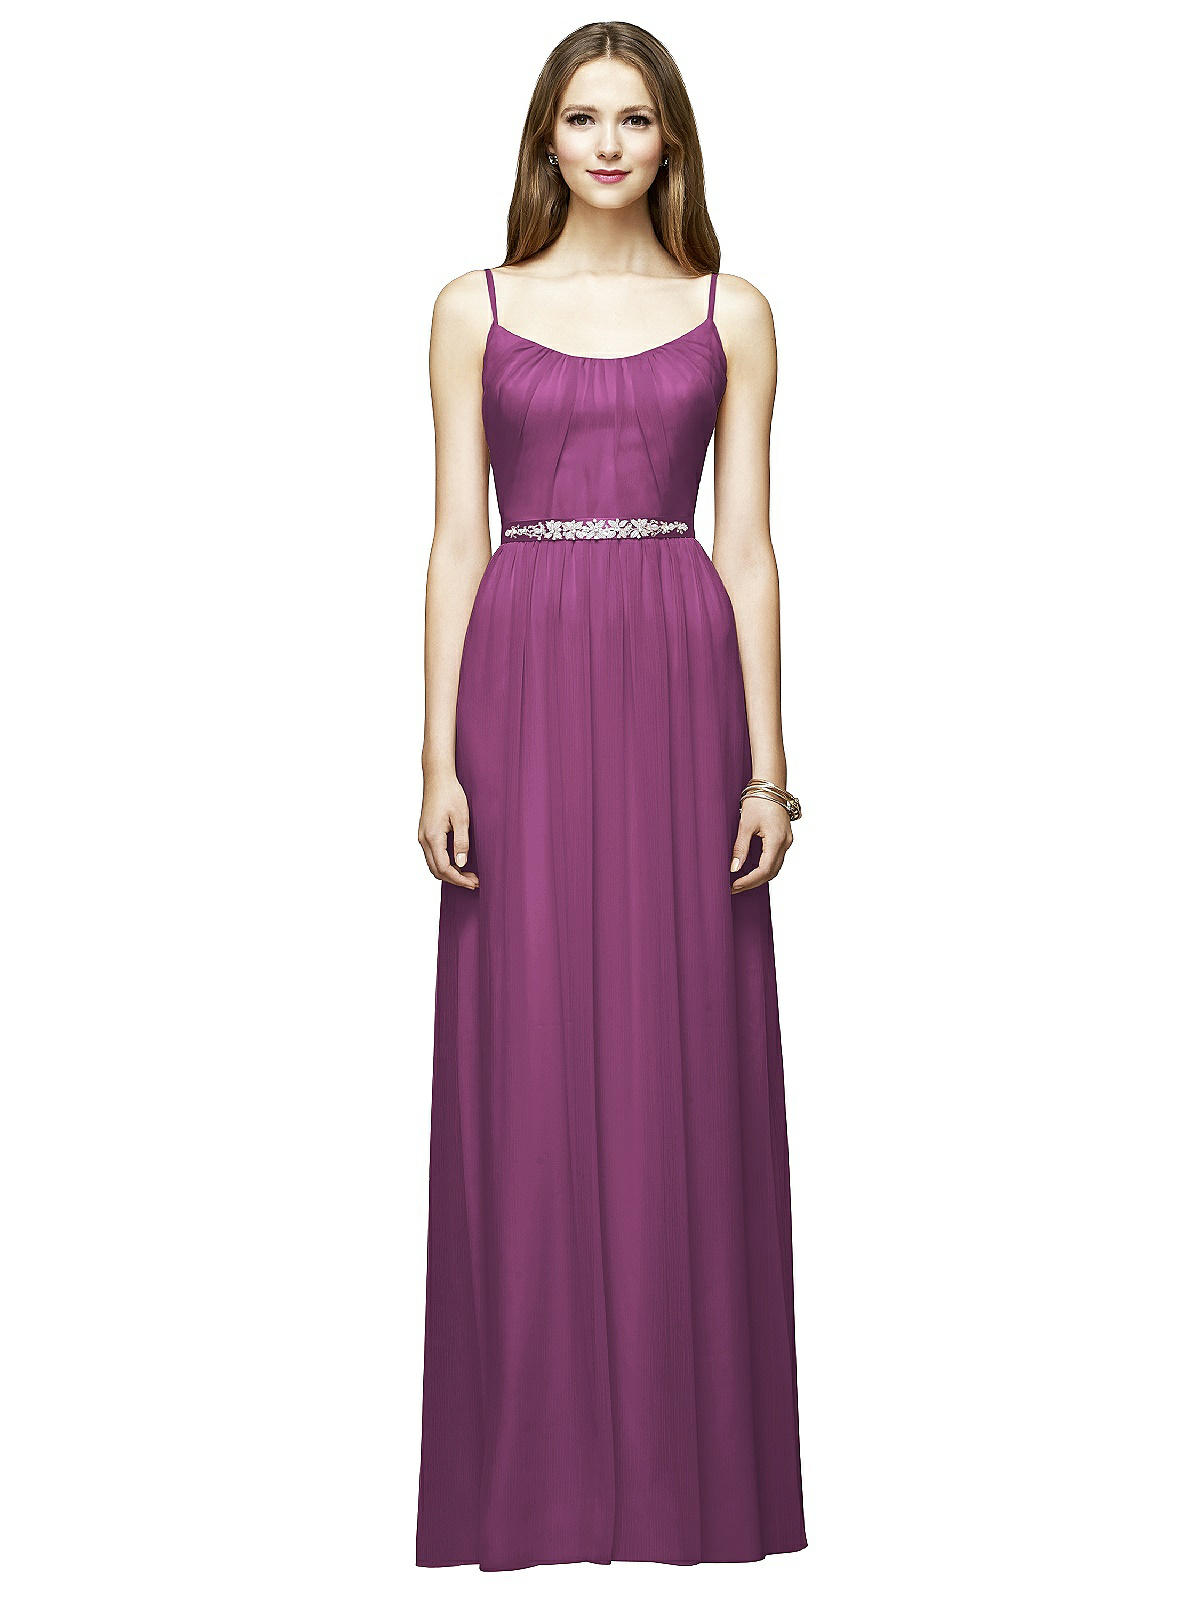 Lela Rose Style Lr214 In Radiant Orchid | The Dessy Group